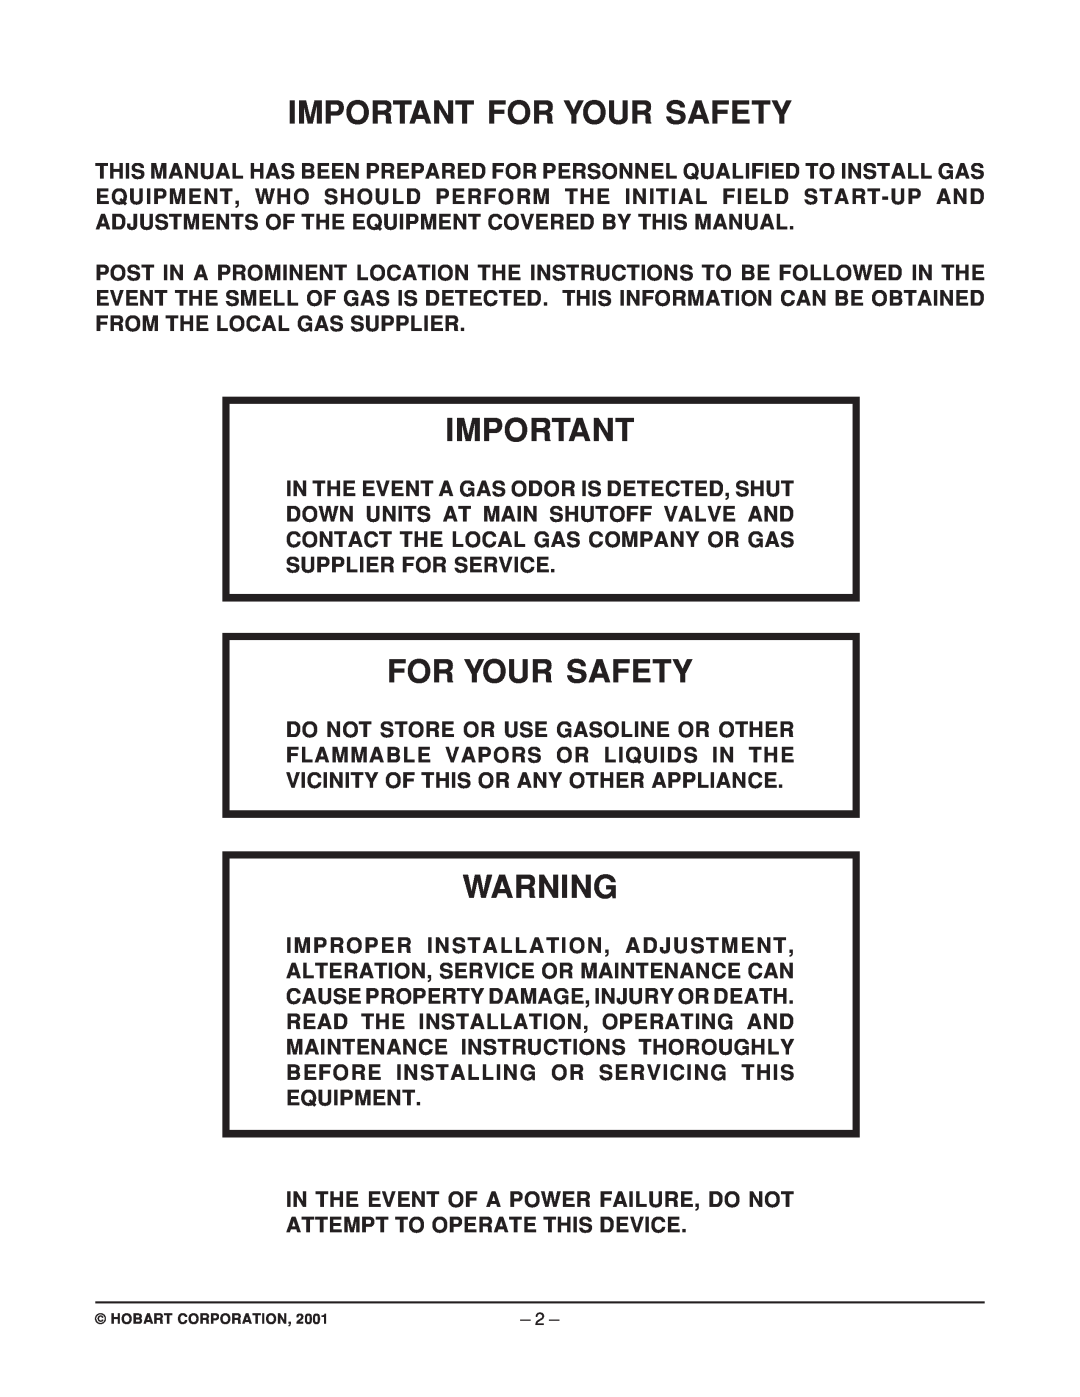 Hobart HPGF15 manual Important For Your Safety 